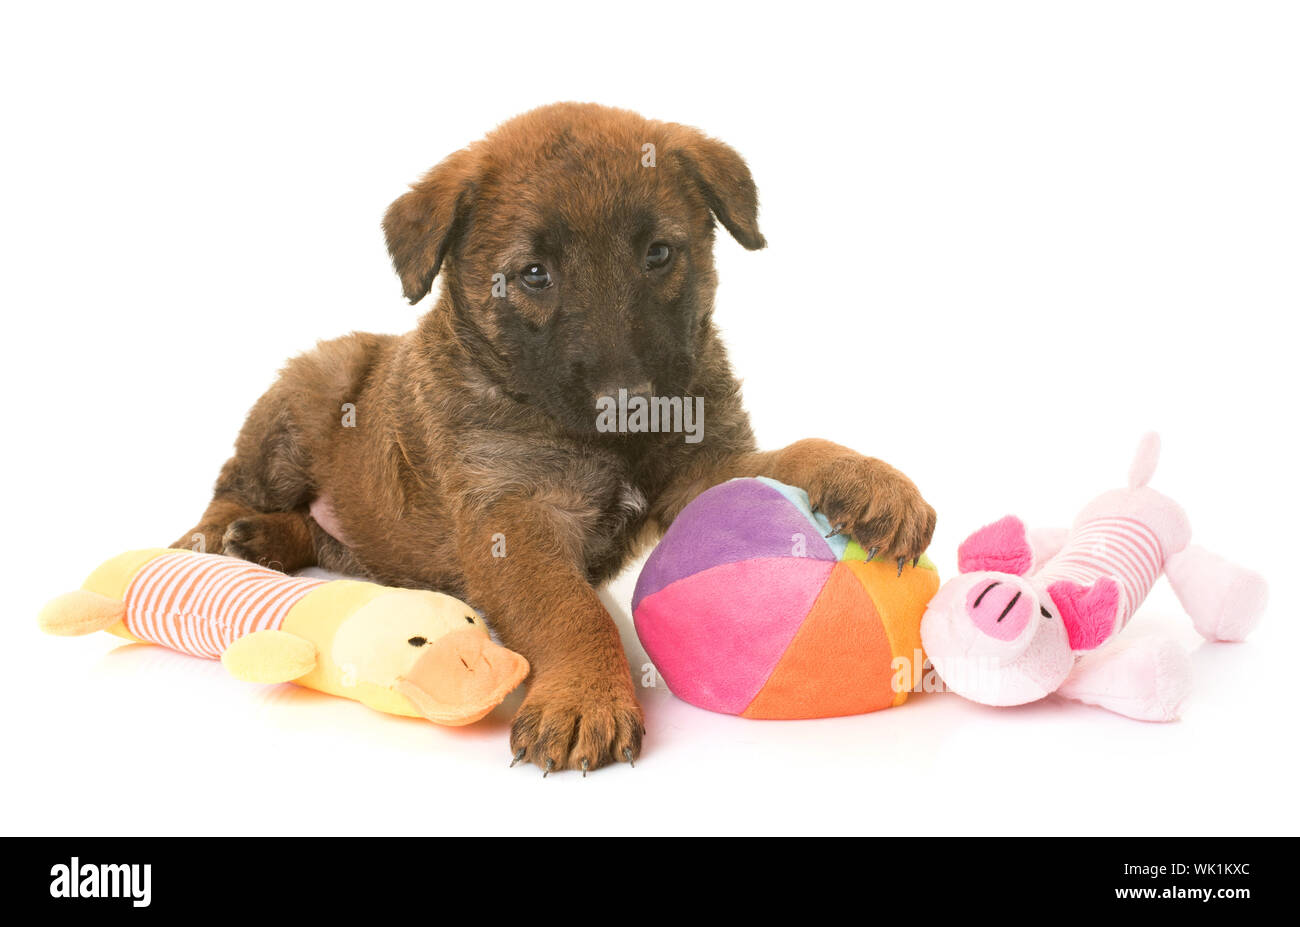 Close-up Of Puppy With Stuffed Toys Over White Background Stock Photo